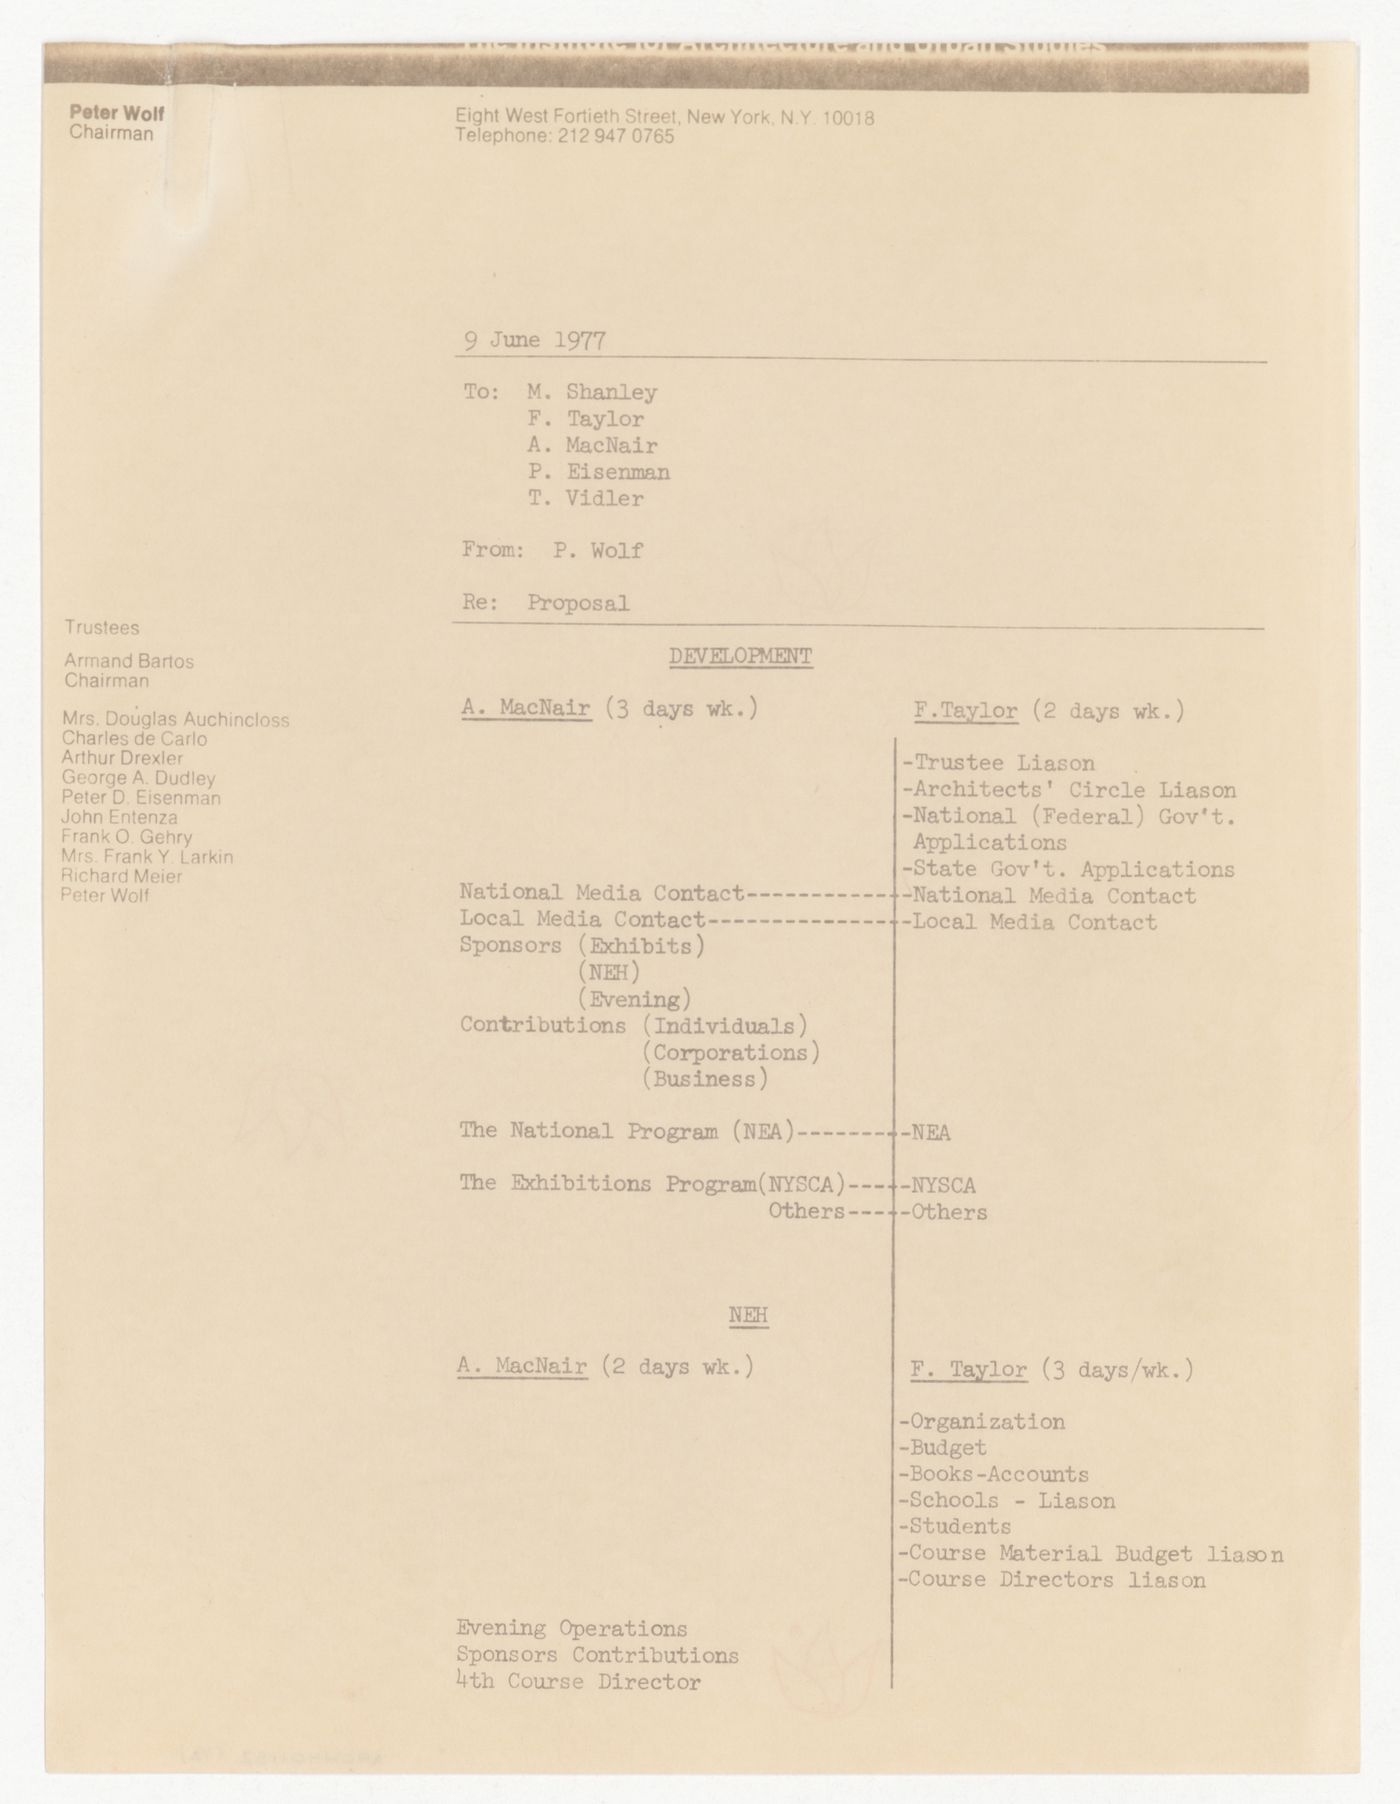 Memorandum from Peter Wolf to M. Stanley, Frederieke Taylor, Andrew MacNair, Peter D. Eisenman and Anthony Vidler about staffing and allocation of tasks